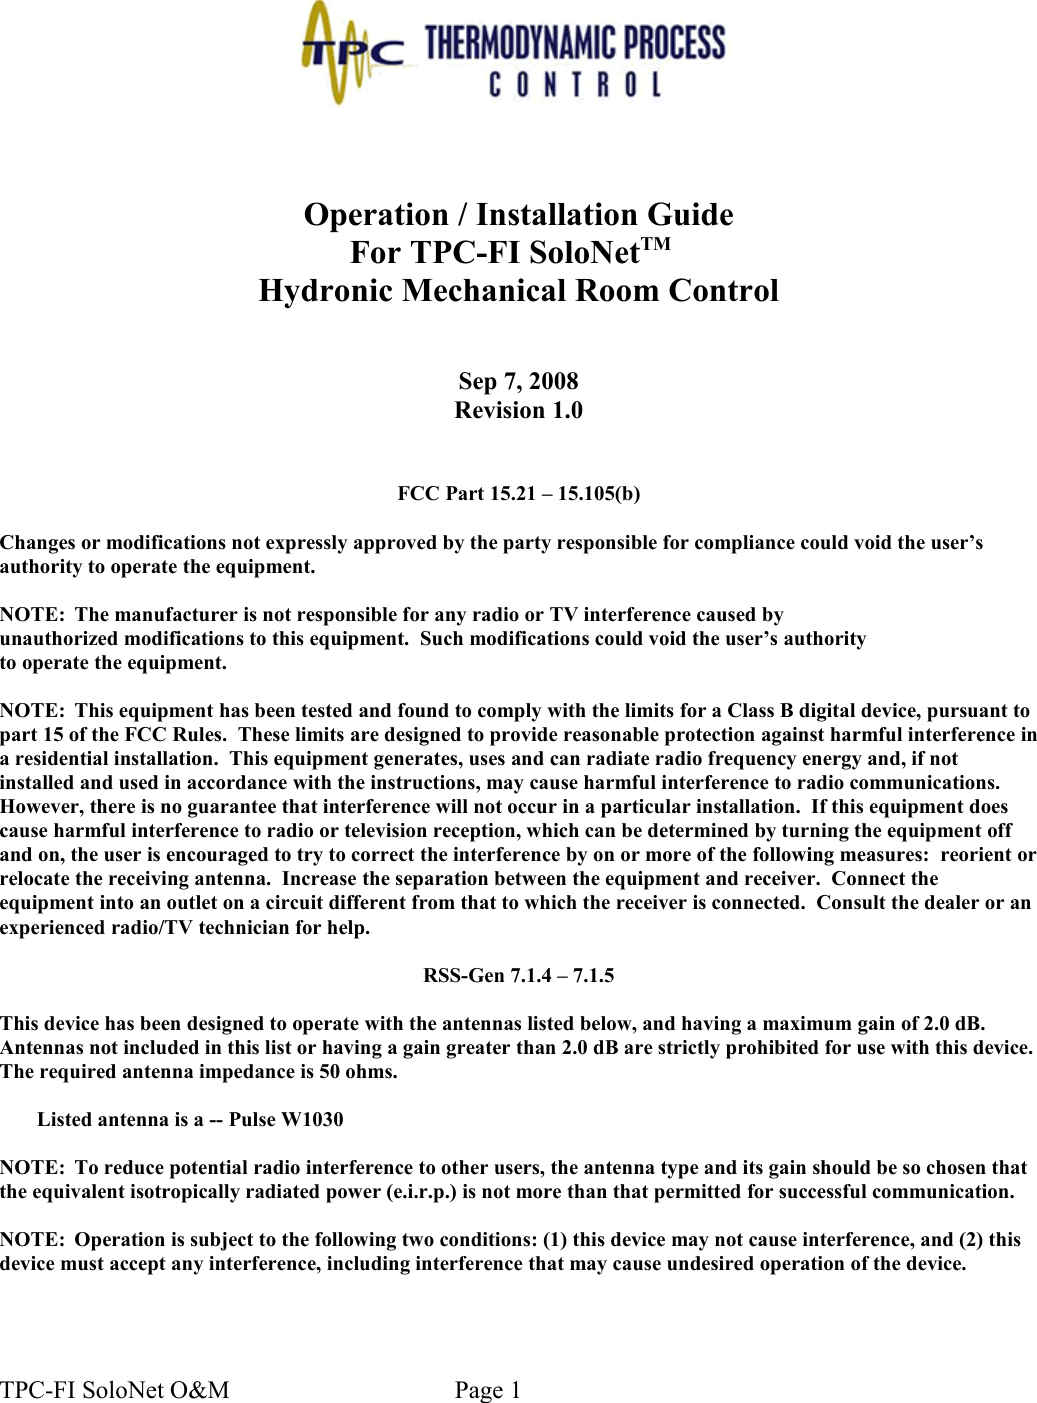 Operation / Installation GuideFor TPC-FI SoloNetTM  Hydronic Mechanical Room ControlSep 7, 2008Revision 1.0FCC Part 15.21 – 15.105(b)Changes or modifications not expressly approved by the party responsible for compliance could void the user’sauthority to operate the equipment.NOTE: The manufacturer is not responsible for any radio or TV interference caused byunauthorized modifications to this equipment.  Such modifications could void the user’s authorityto operate the equipment.NOTE: This equipment has been tested and found to comply with the limits for a Class B digital device, pursuant to part 15 of the FCC Rules.  These limits are designed to provide reasonable protection against harmful interference in a residential installation.  This equipment generates, uses and can radiate radio frequency energy and, if not installed and used in accordance with the instructions, may cause harmful interference to radio communications. However, there is no guarantee that interference will not occur in a particular installation.  If this equipment does cause harmful interference to radio or television reception, which can be determined by turning the equipment off and on, the user is encouraged to try to correct the interference by on or more of the following measures:  reorient or relocate the receiving antenna.  Increase the separation between the equipment and receiver.  Connect the equipment into an outlet on a circuit different from that to which the receiver is connected.  Consult the dealer or an experienced radio/TV technician for help.RSS-Gen 7.1.4 – 7.1.5This device has been designed to operate with the antennas listed below, and having a maximum gain of 2.0 dB. Antennas not included in this list or having a gain greater than 2.0 dB are strictly prohibited for use with this device. The required antenna impedance is 50 ohms. Listed antenna is a -- Pulse W1030NOTE: To reduce potential radio interference to other users, the antenna type and its gain should be so chosen that the equivalent isotropically radiated power (e.i.r.p.) is not more than that permitted for successful communication.NOTE: Operation is subject to the following two conditions: (1) this device may not cause interference, and (2) this device must accept any interference, including interference that may cause undesired operation of the device.TPC-FI SoloNet O&amp;M                                    Page 1